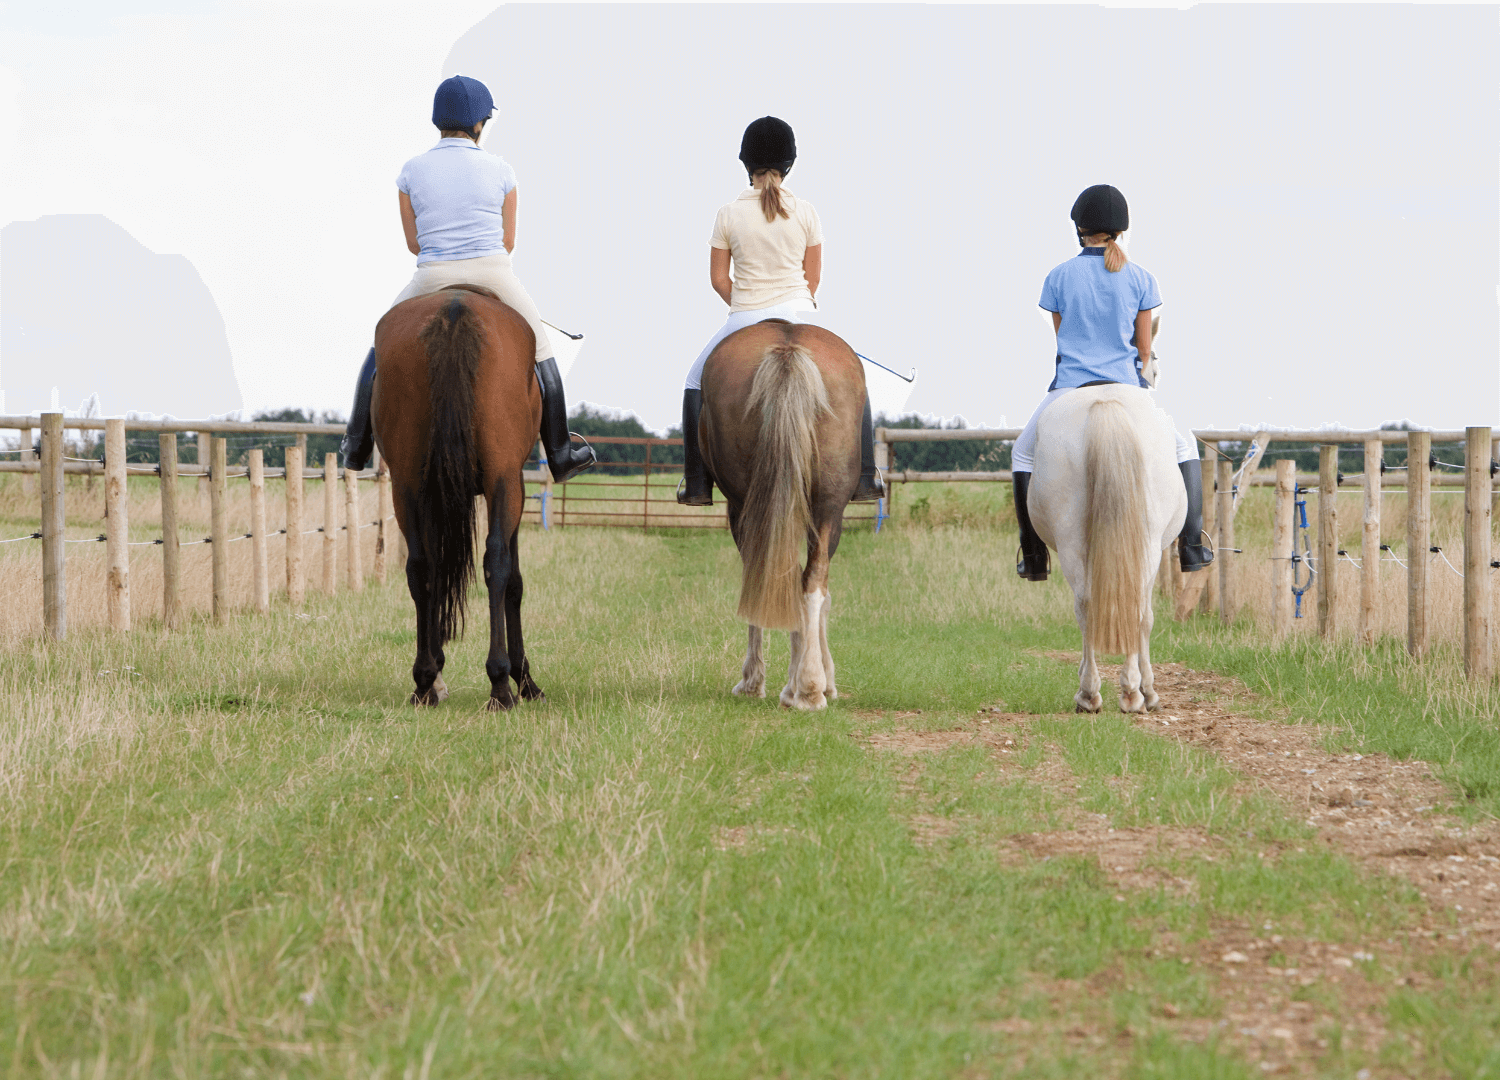 Three girls horses in a field. All three girls are wearing black riding boots, white pants, collared shirts and black riding helmets. The horses are brown and white.